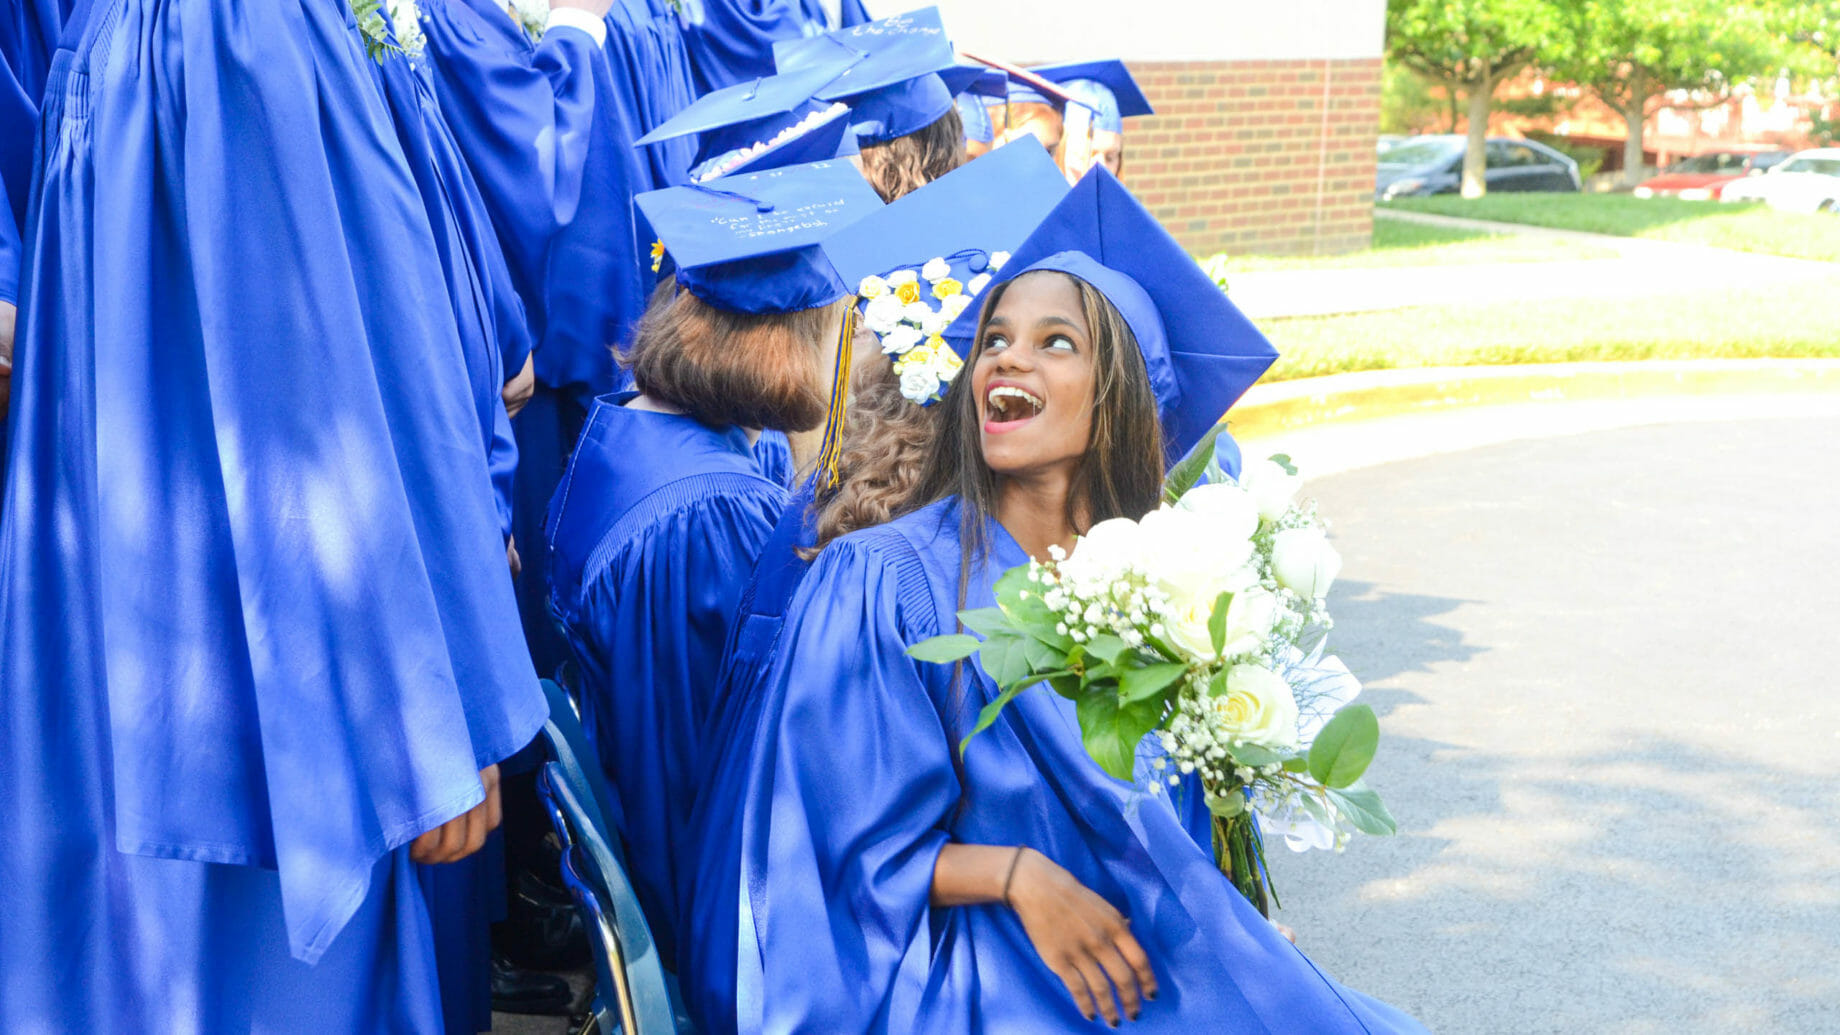 Graduates Excited for Their Accomplishment